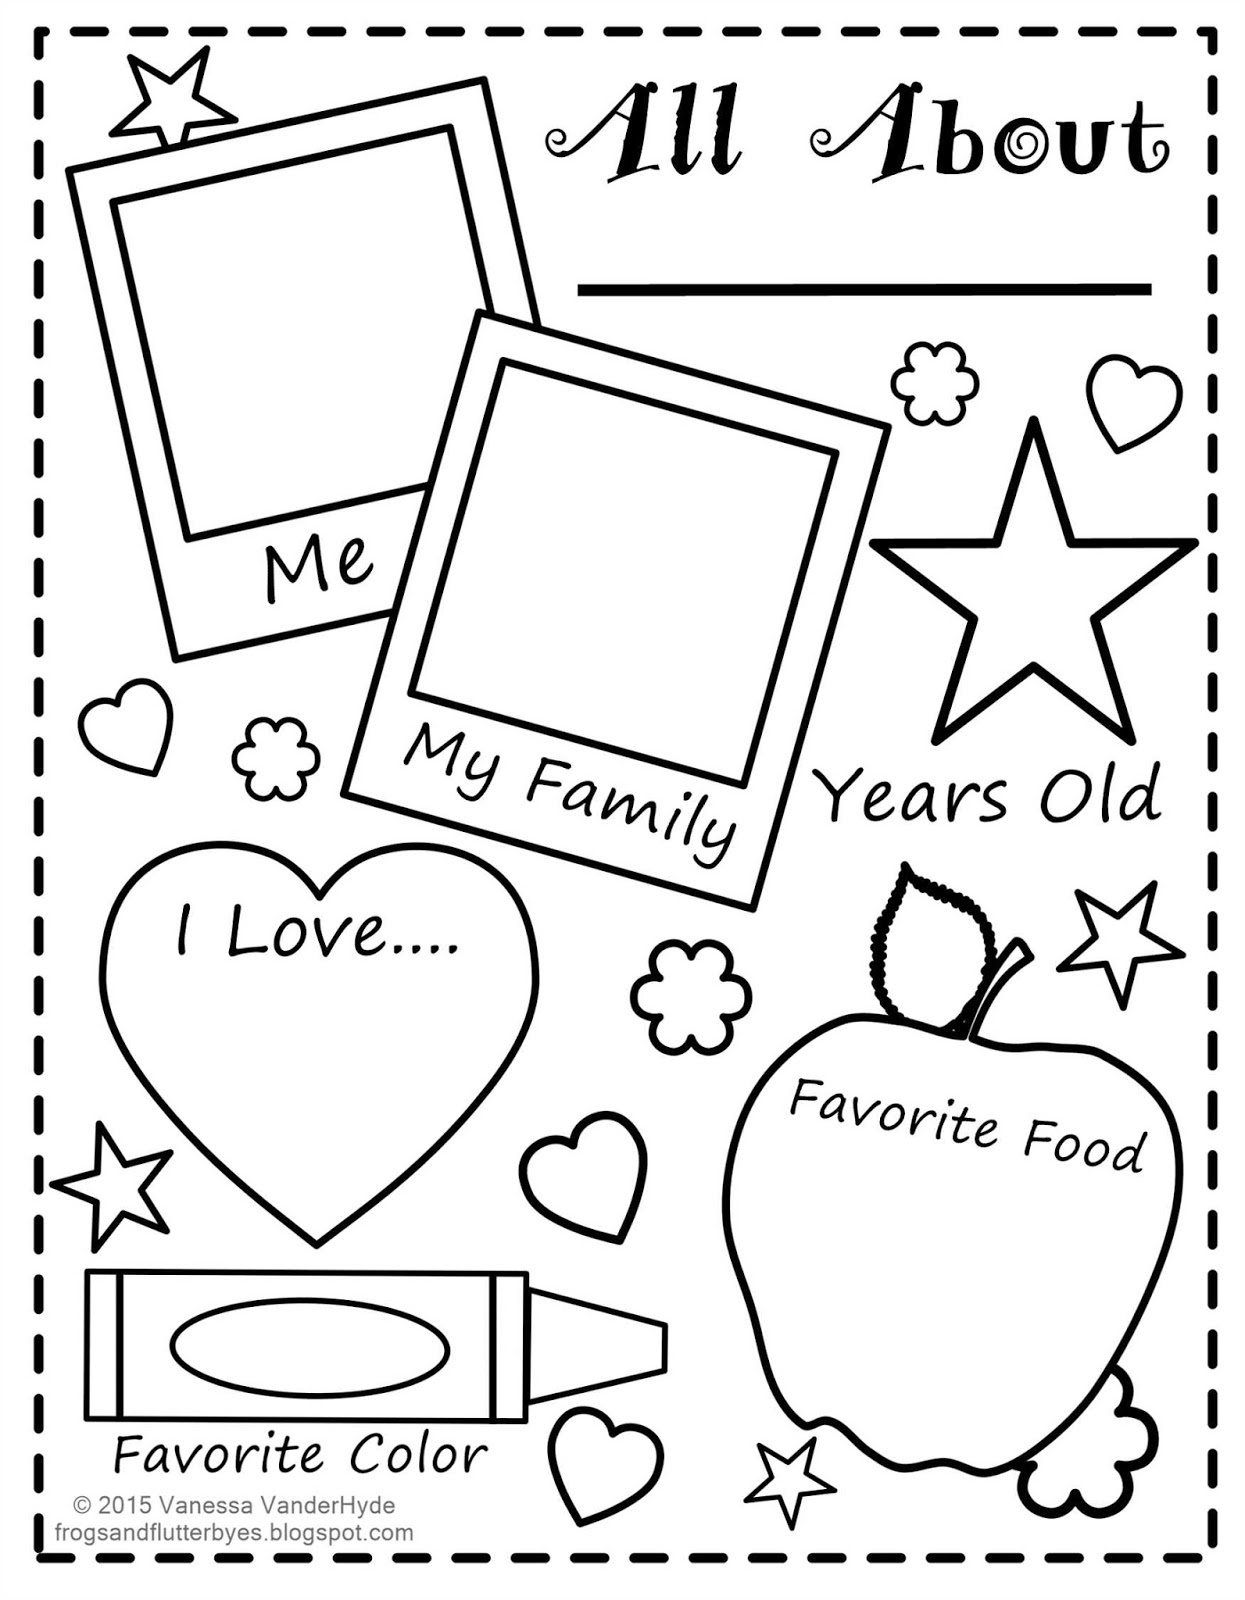 All About Me Worksheet All About Me Free Printable Worksheets - Free Printable All About Me Worksheet